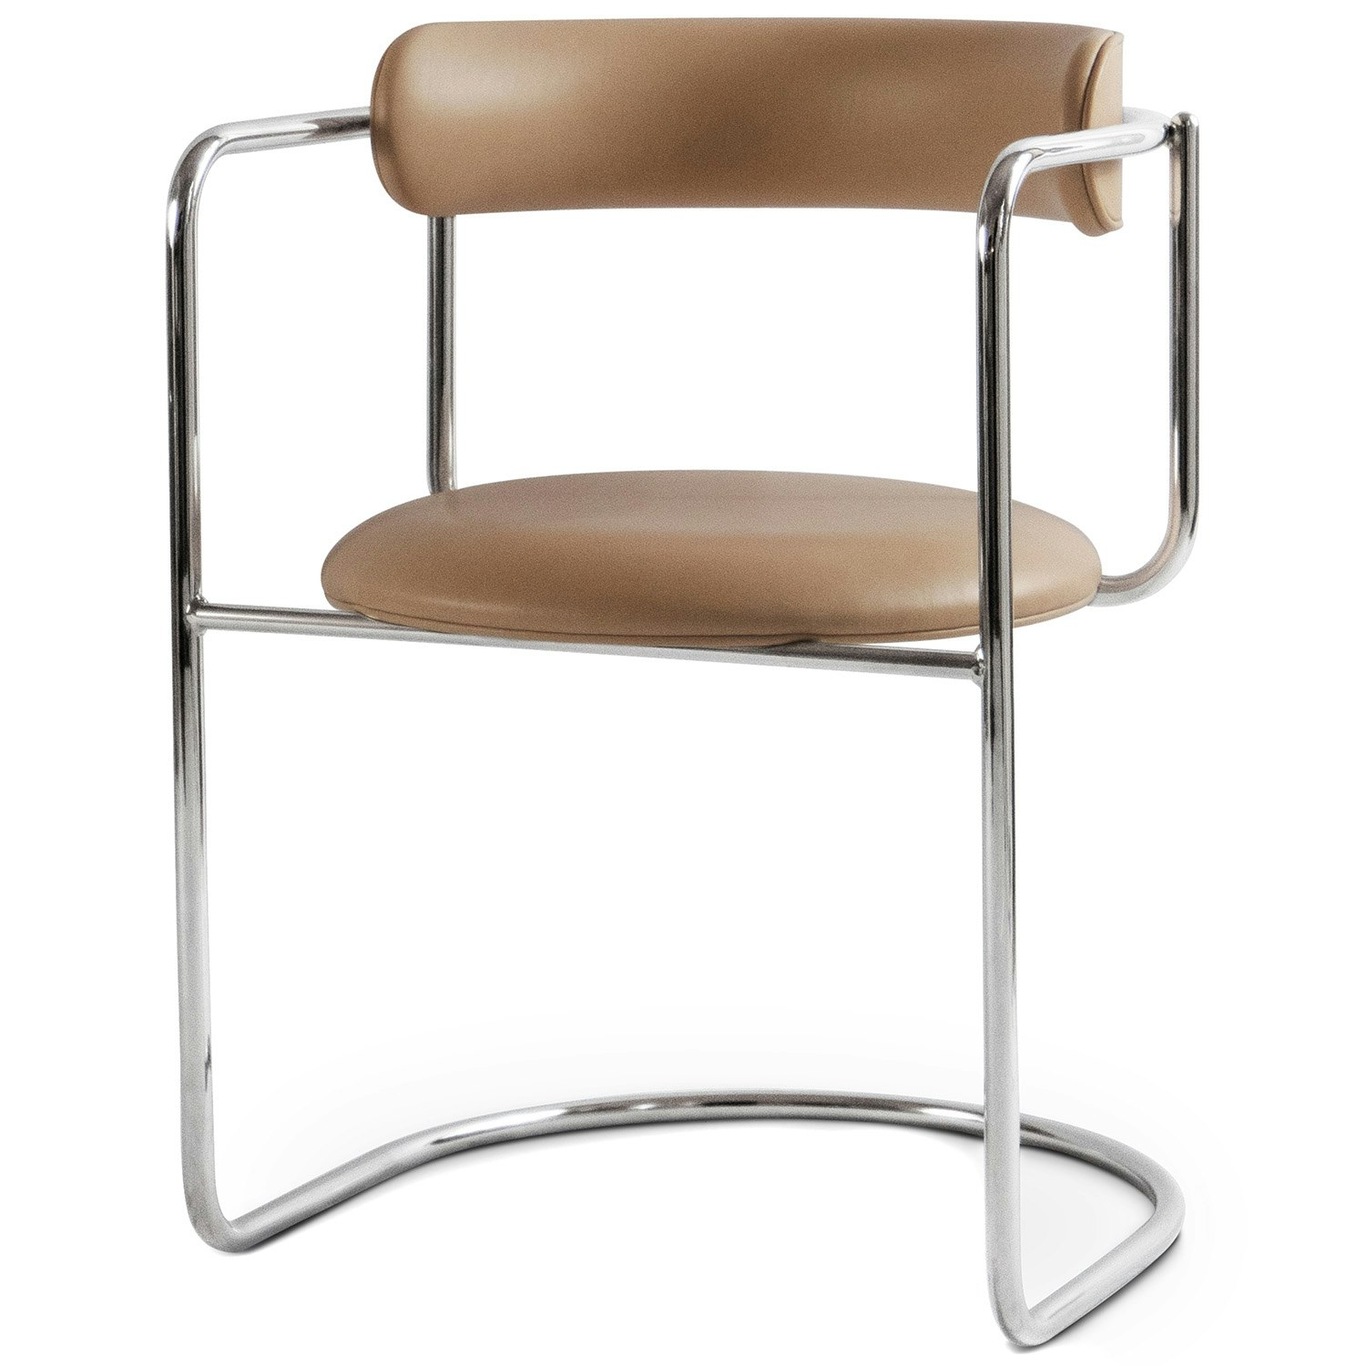 FF Cantilever Chair, Tan Leather / Chrome